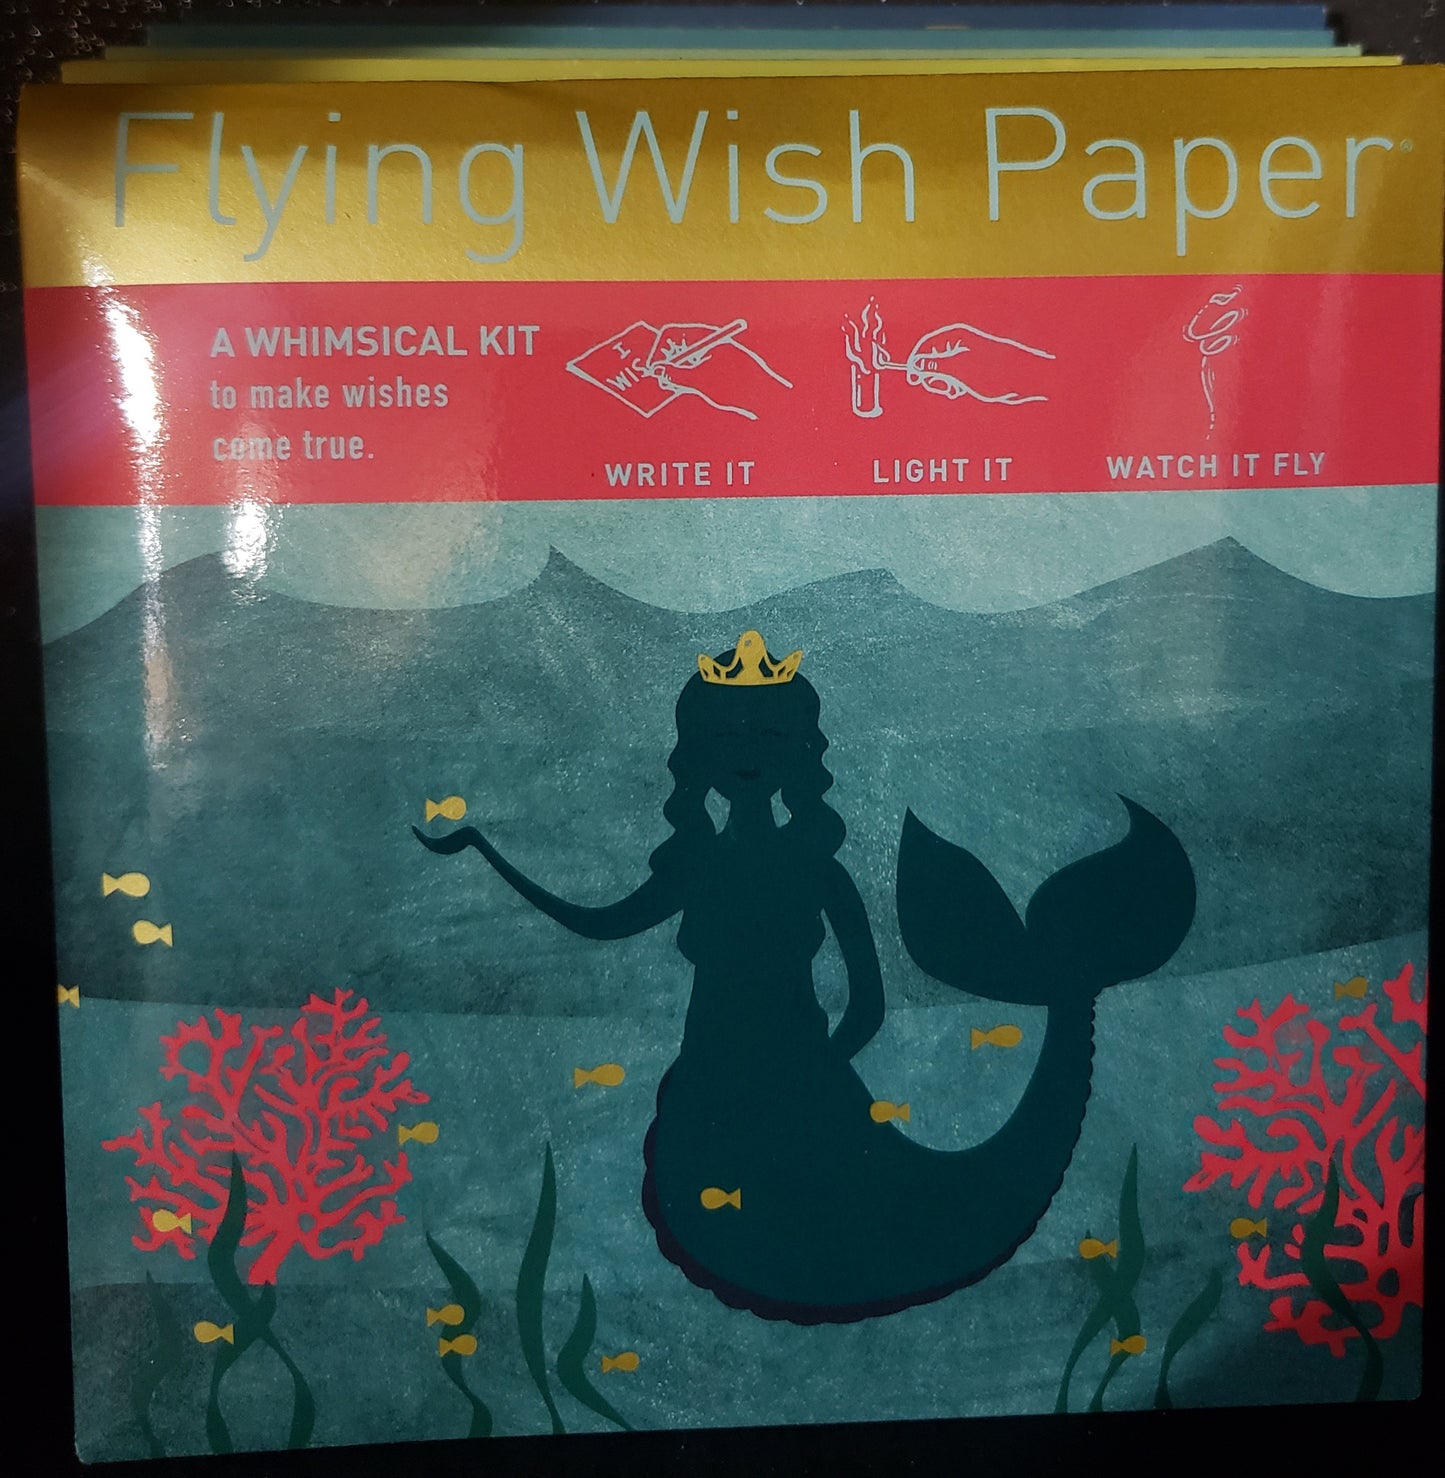 Flying Wish Paper ~ Small